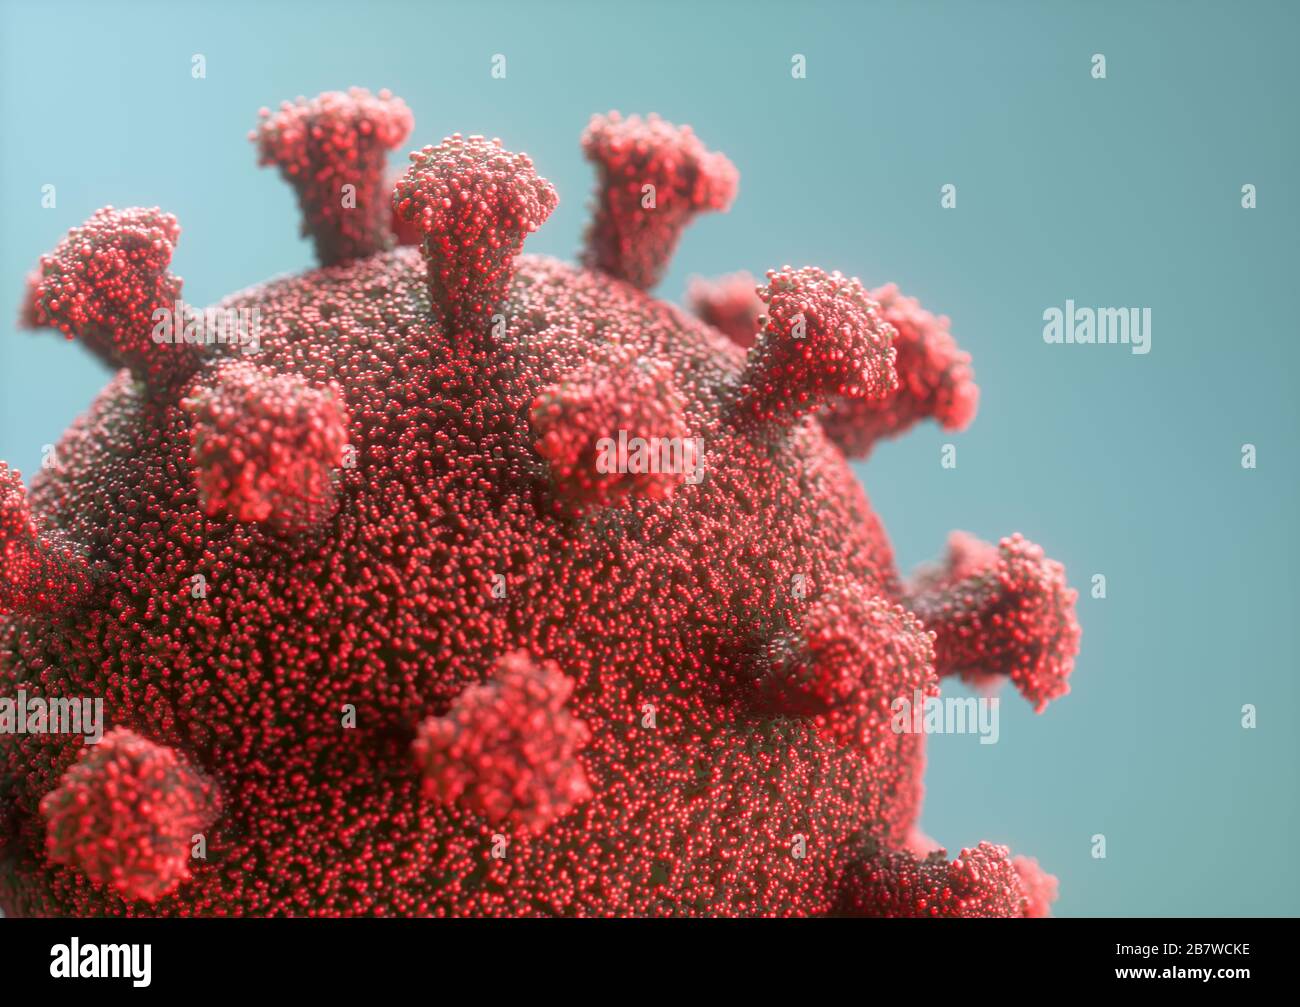 Viral structure. Viral particle is made up of a nucleus of nucleic acid (DNA or RNA) surrounded by a protein coat. Conceptual illustrative virus. 3D i Stock Photo